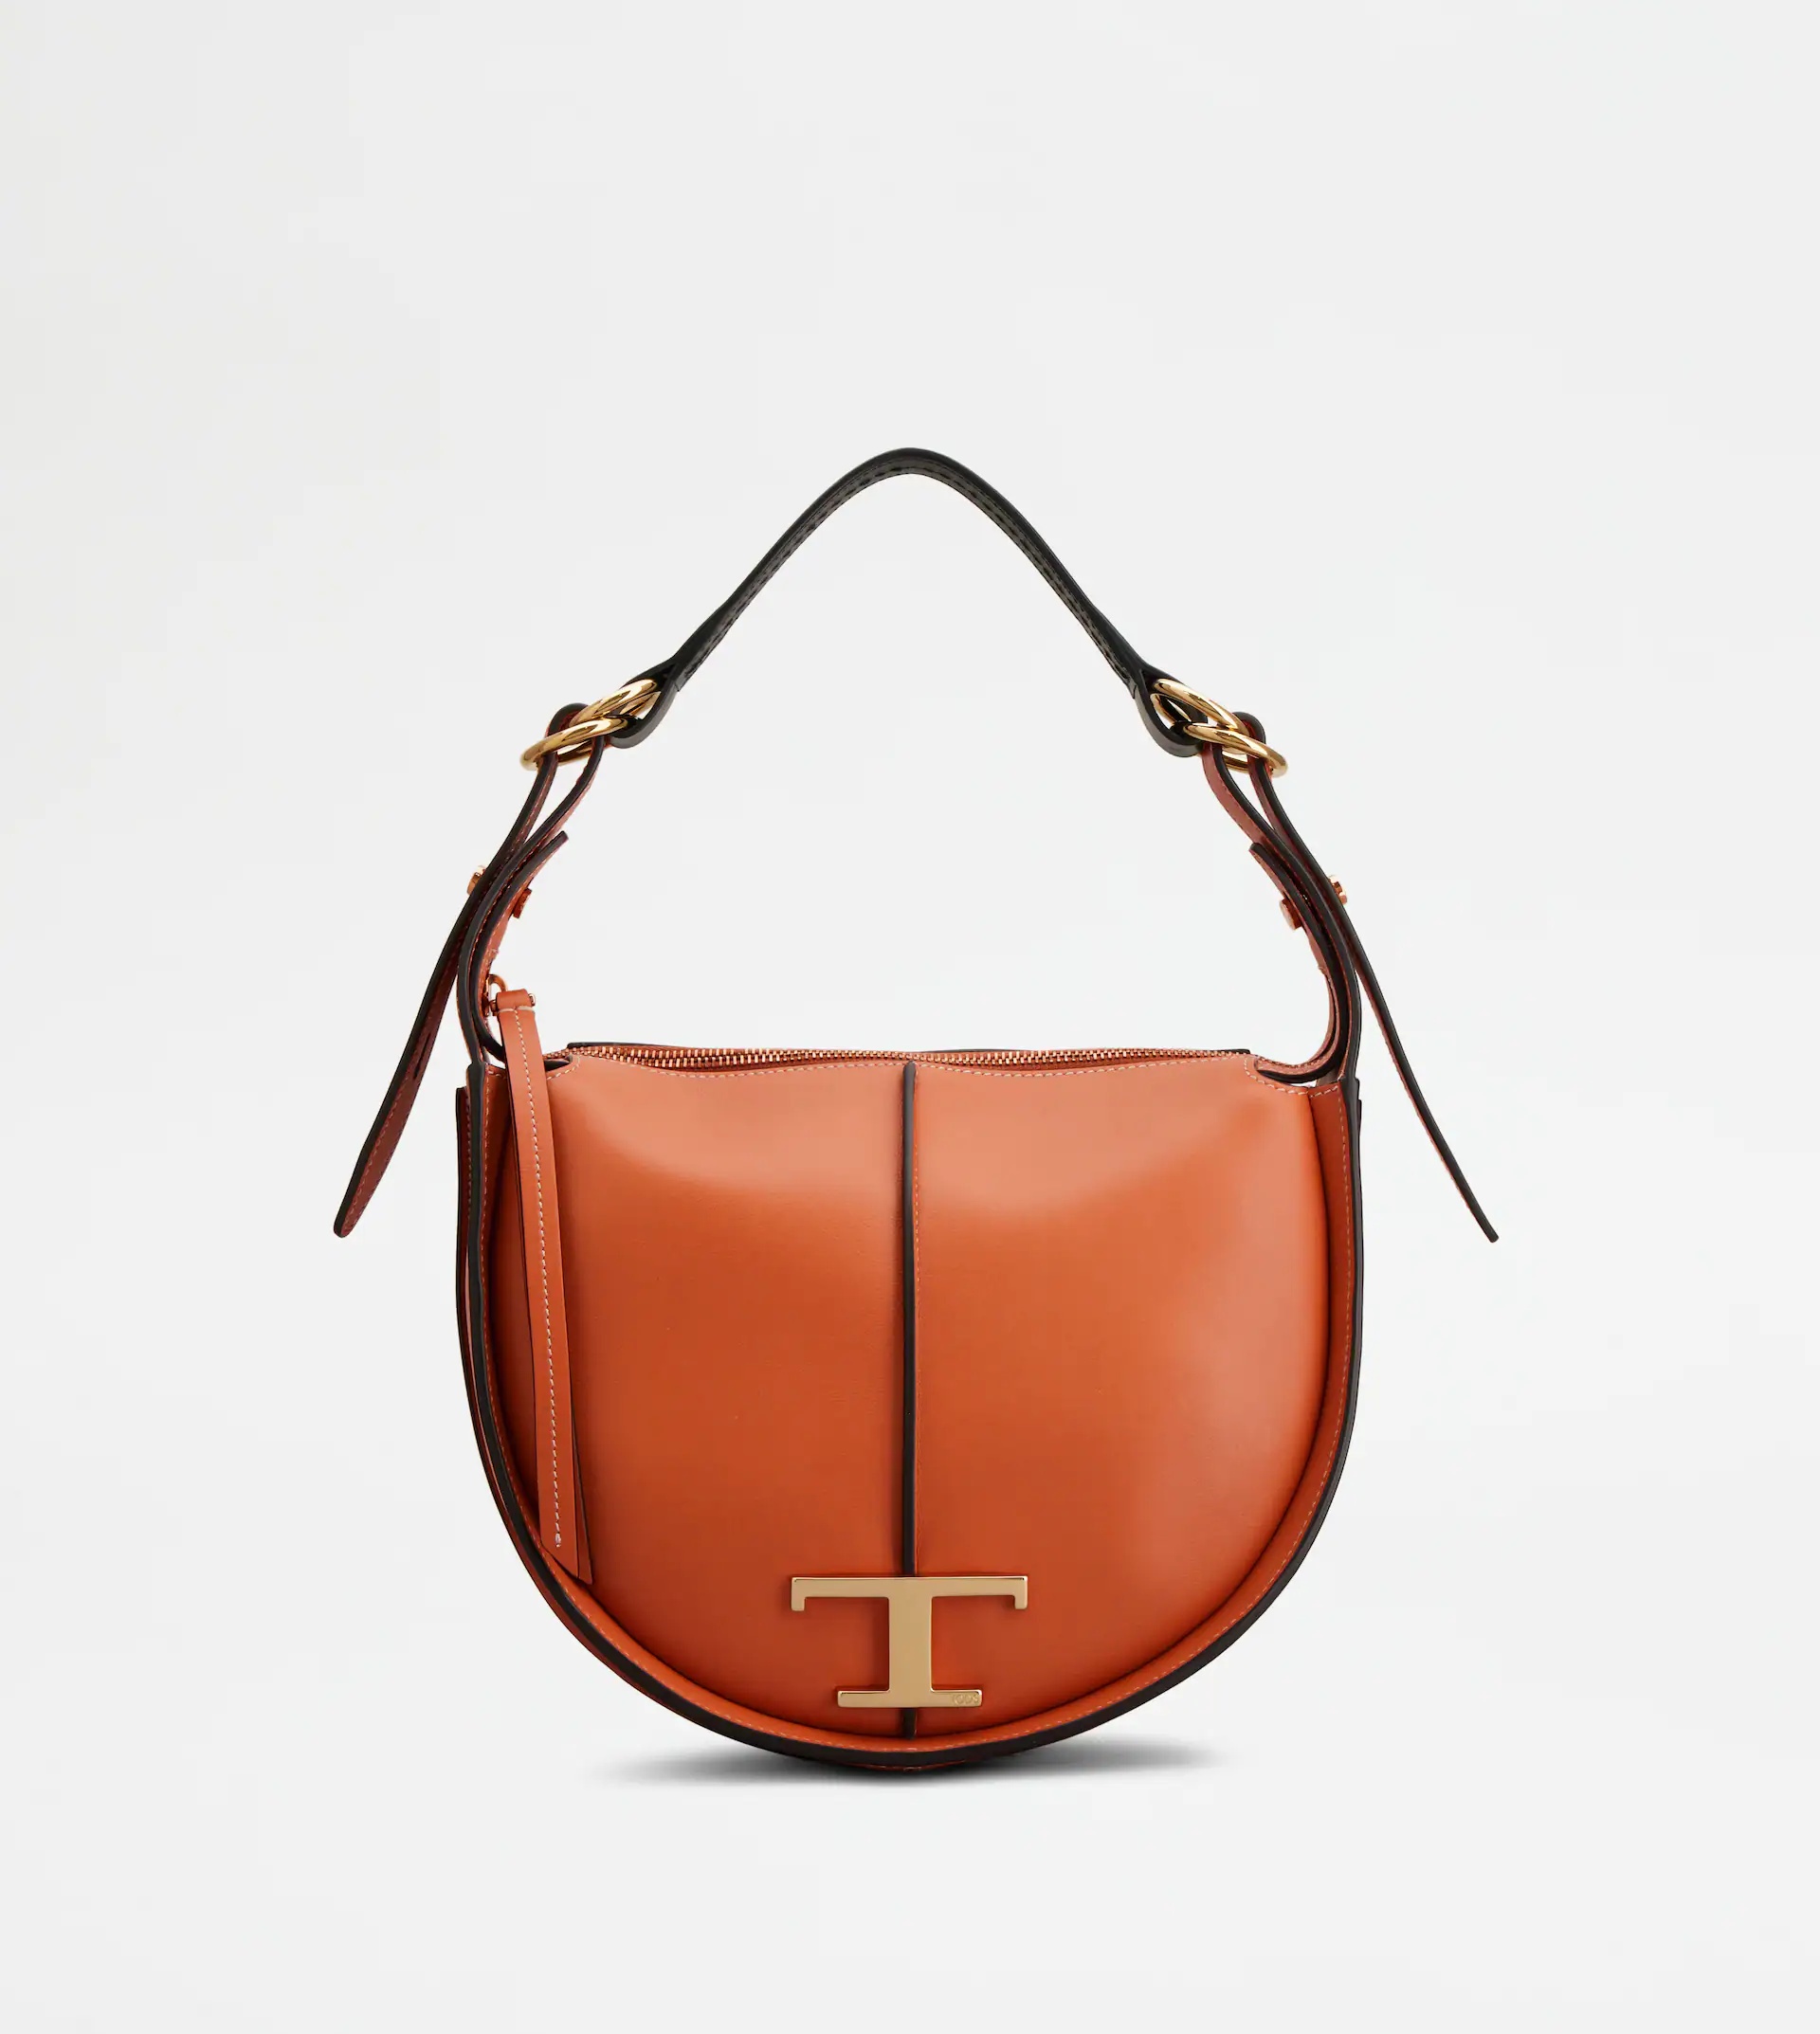 TIMELESS HOBO BAG IN LEATHER SMALL - ORANGE - 1